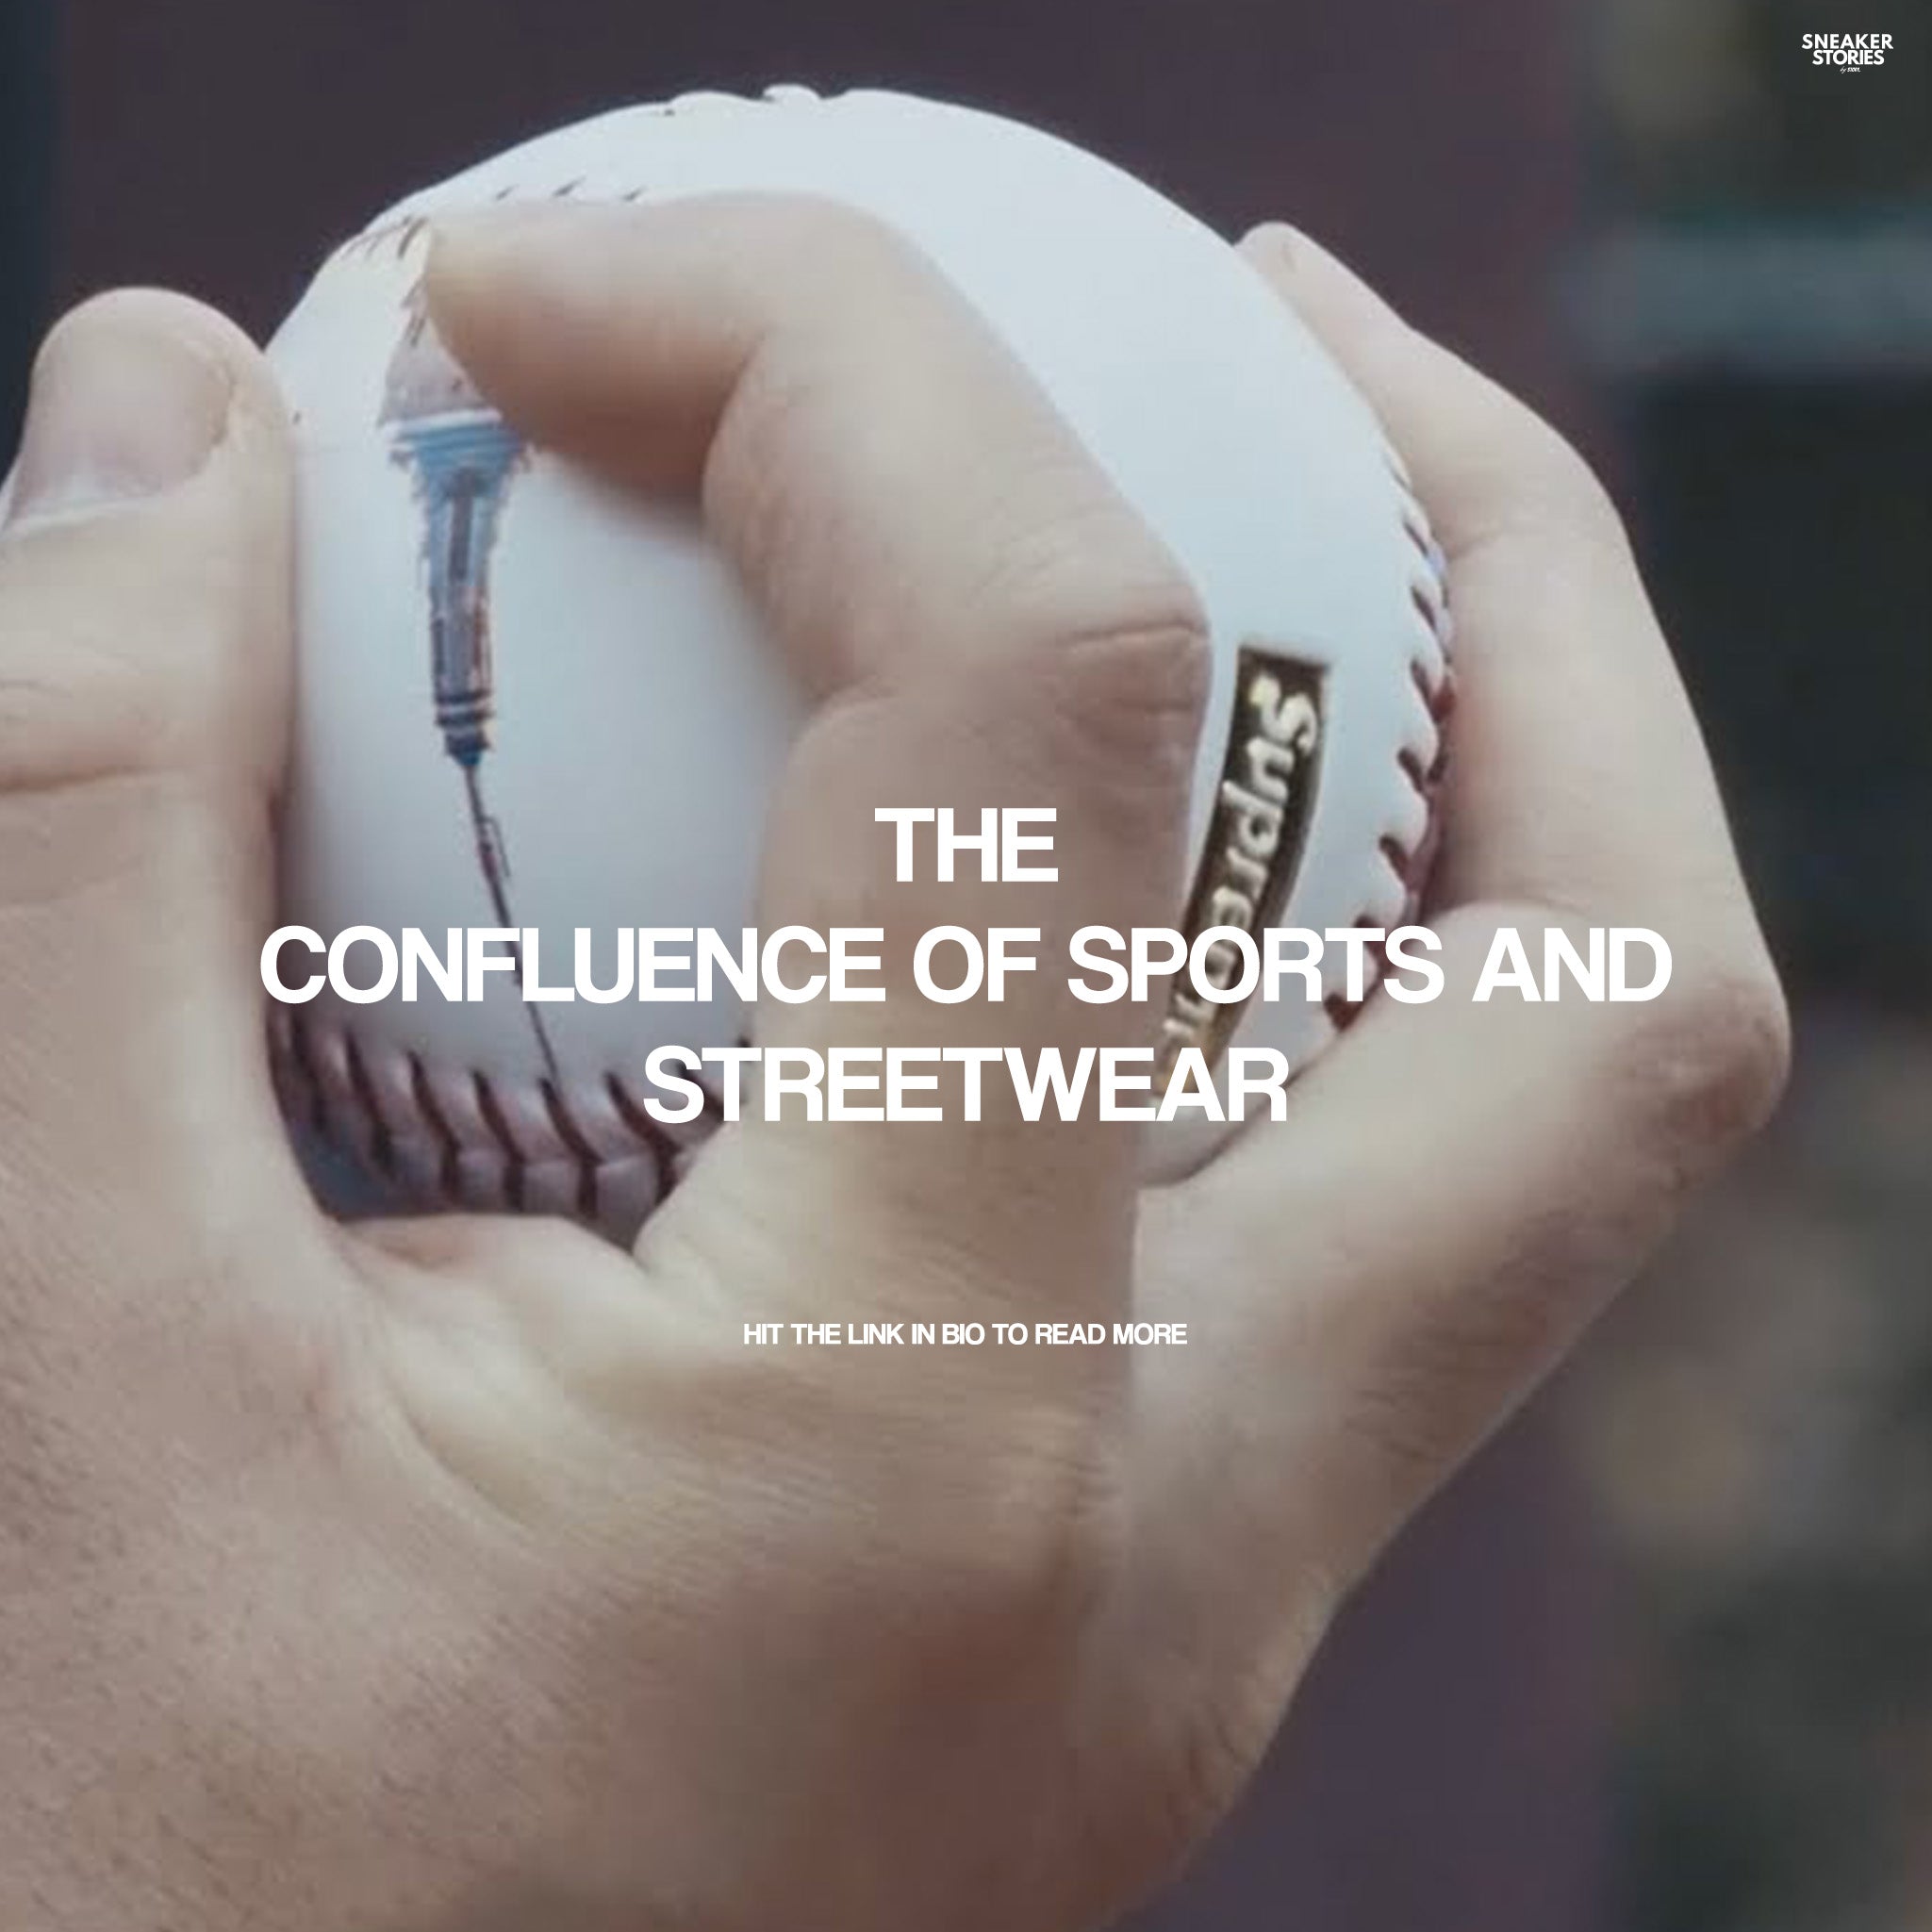 The Confluence of sports and streetwear